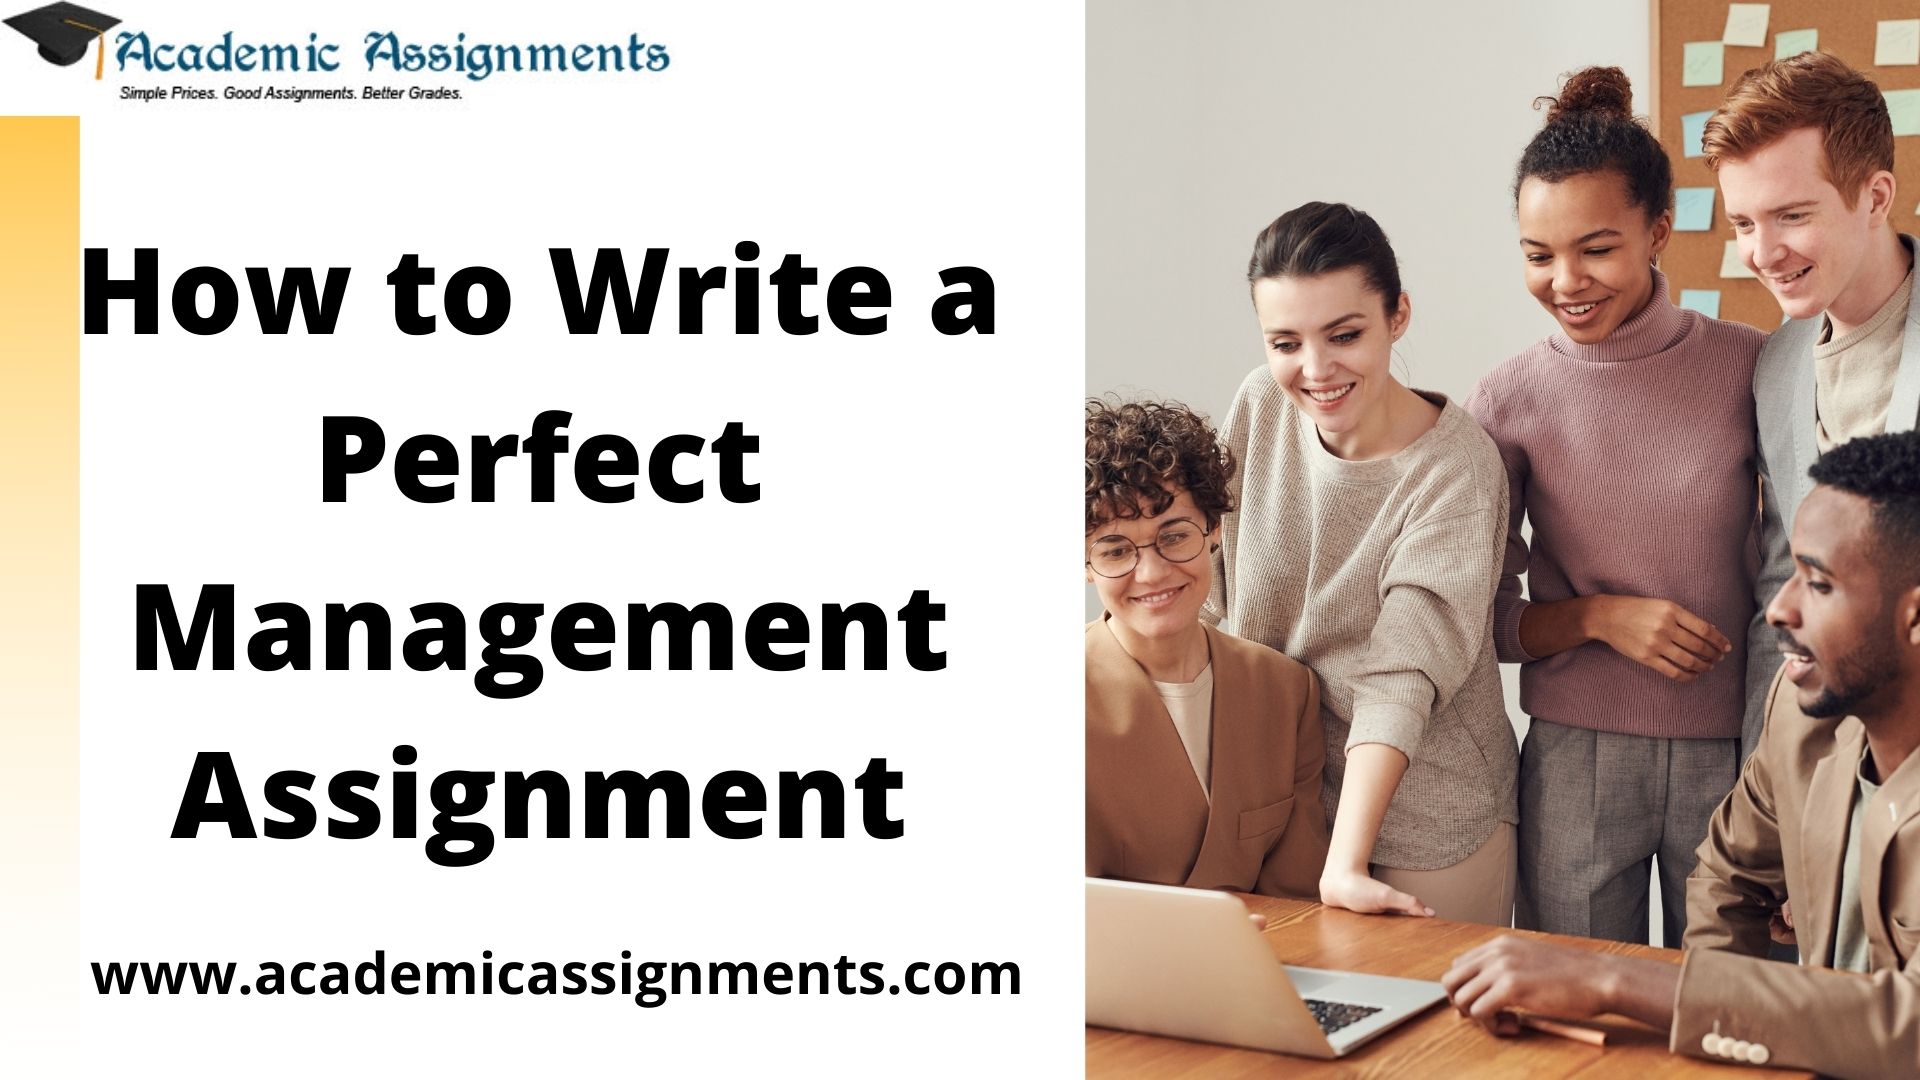 How to Write a Perfect Management Assignment